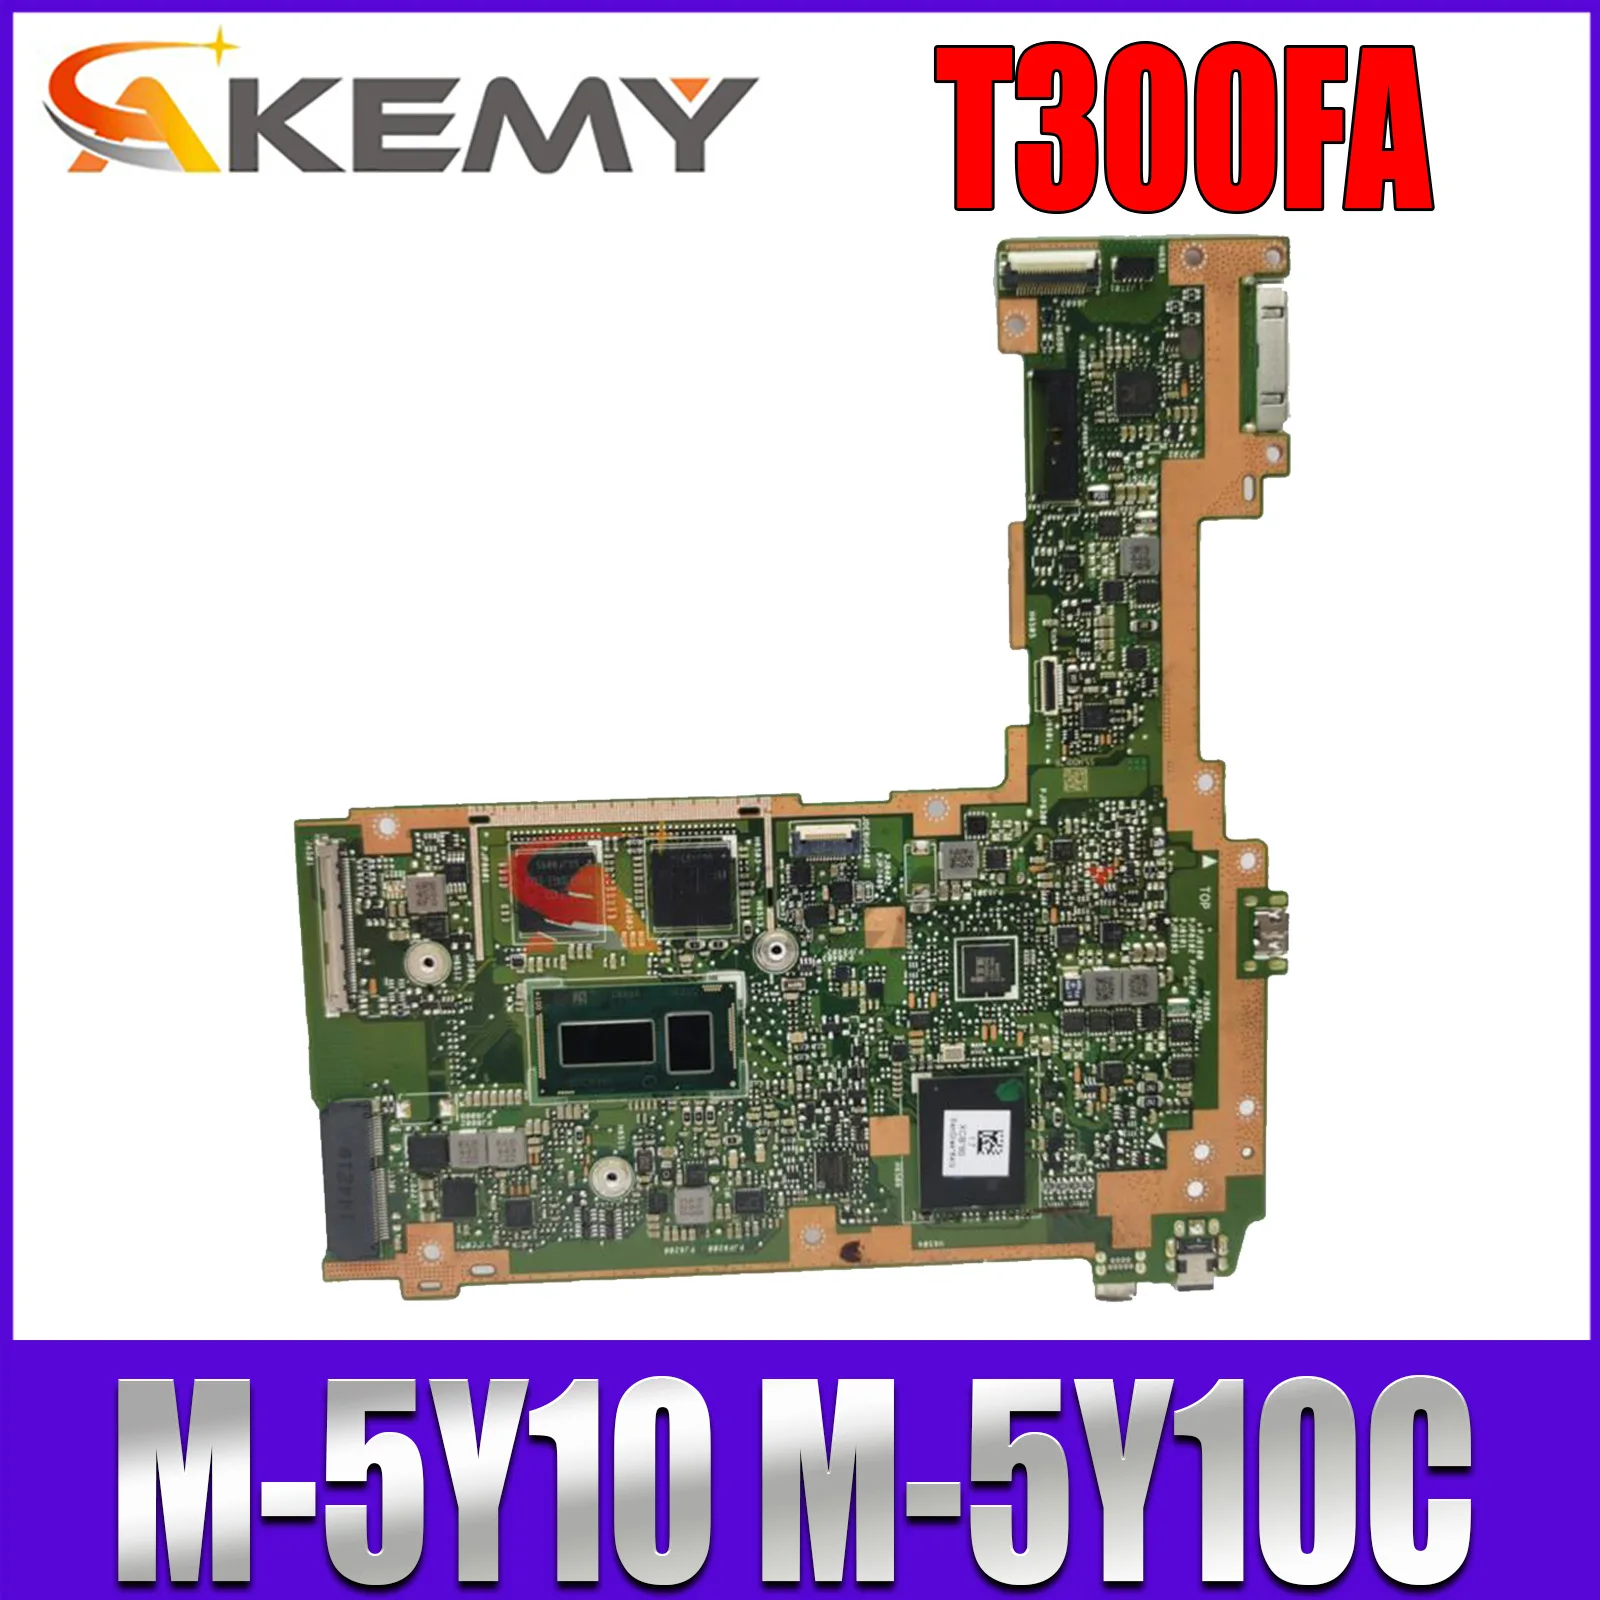 

T300F CPU M-5Y10 M-5Y10C 4GB-RAM SSD/64G Notebook Mainboard For ASUS T300FA T300 Laptop Motherboard Main Board Test 100% OK